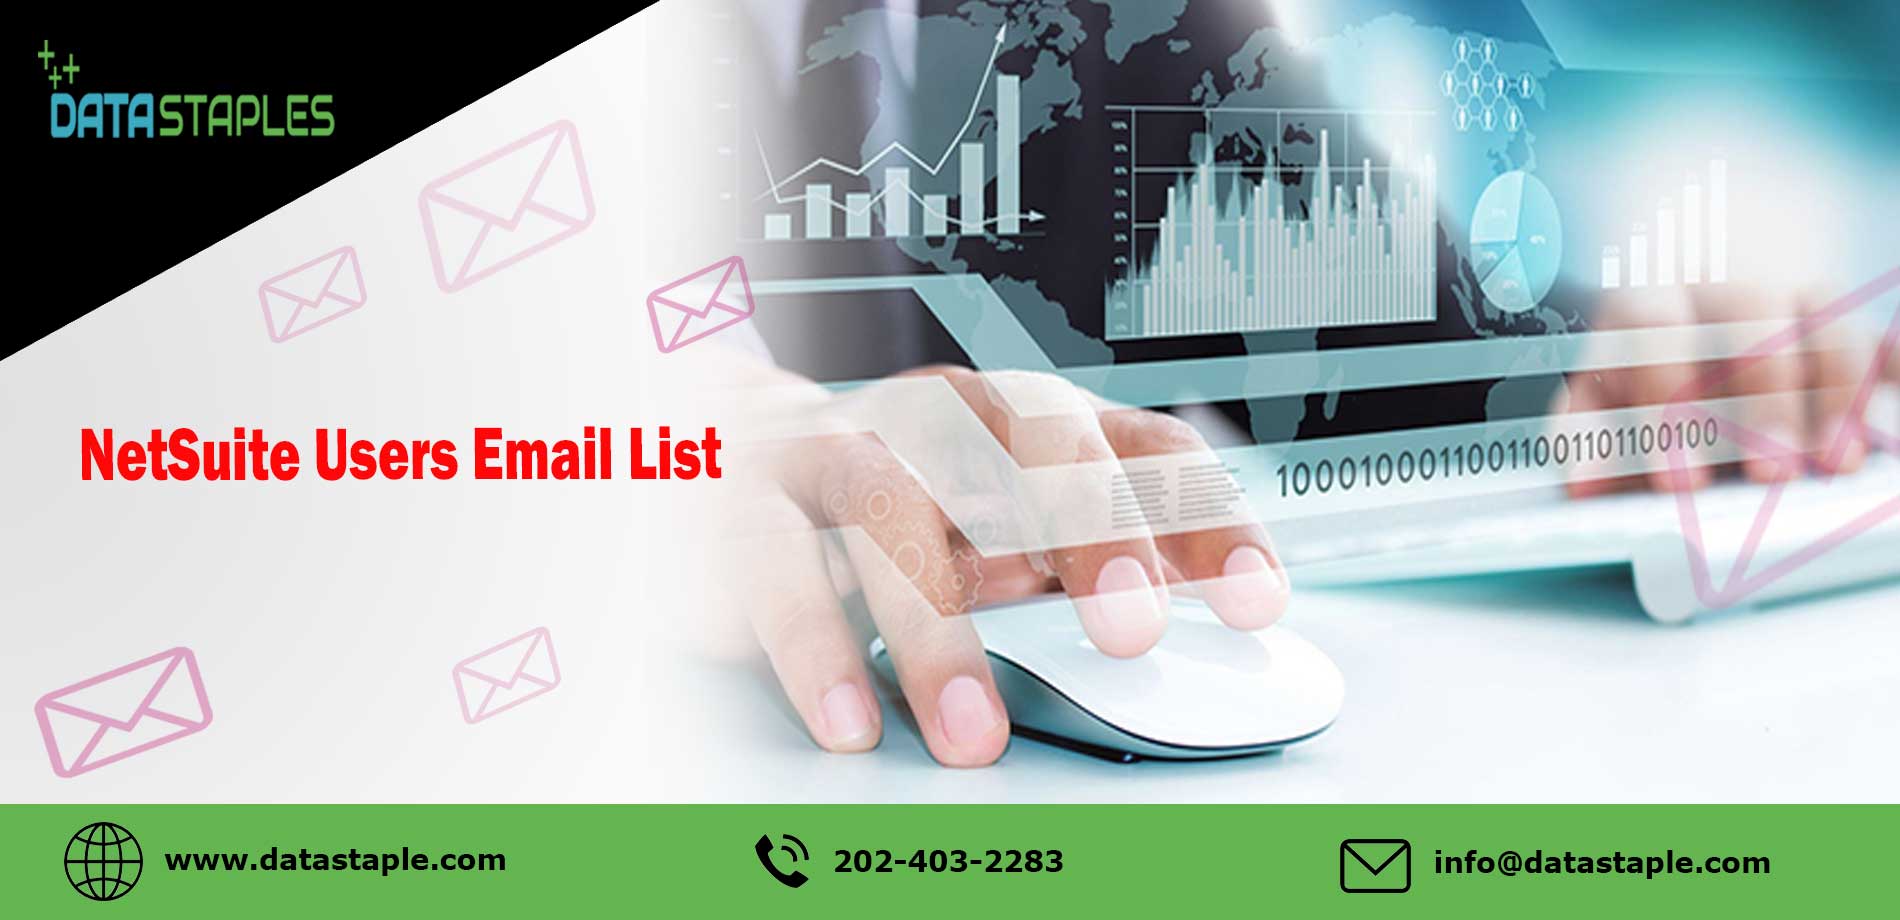 Netsuite Users Email List | DataStaples